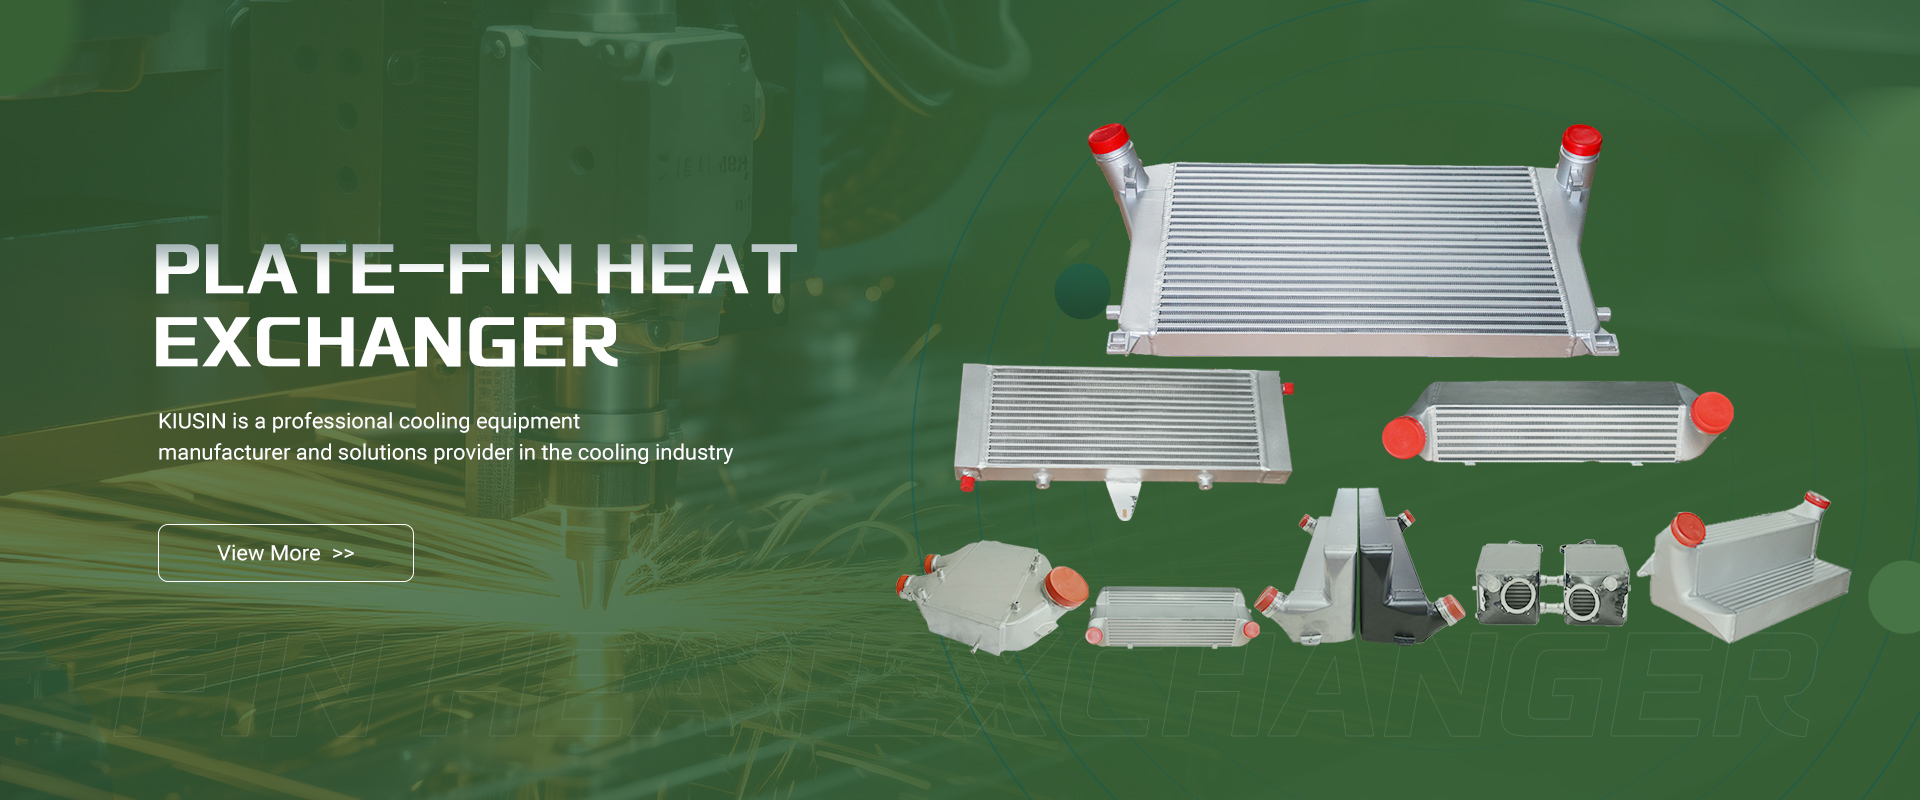 The Leading Manufacturer of Aluminum Plate-Fin Heat Exchangers